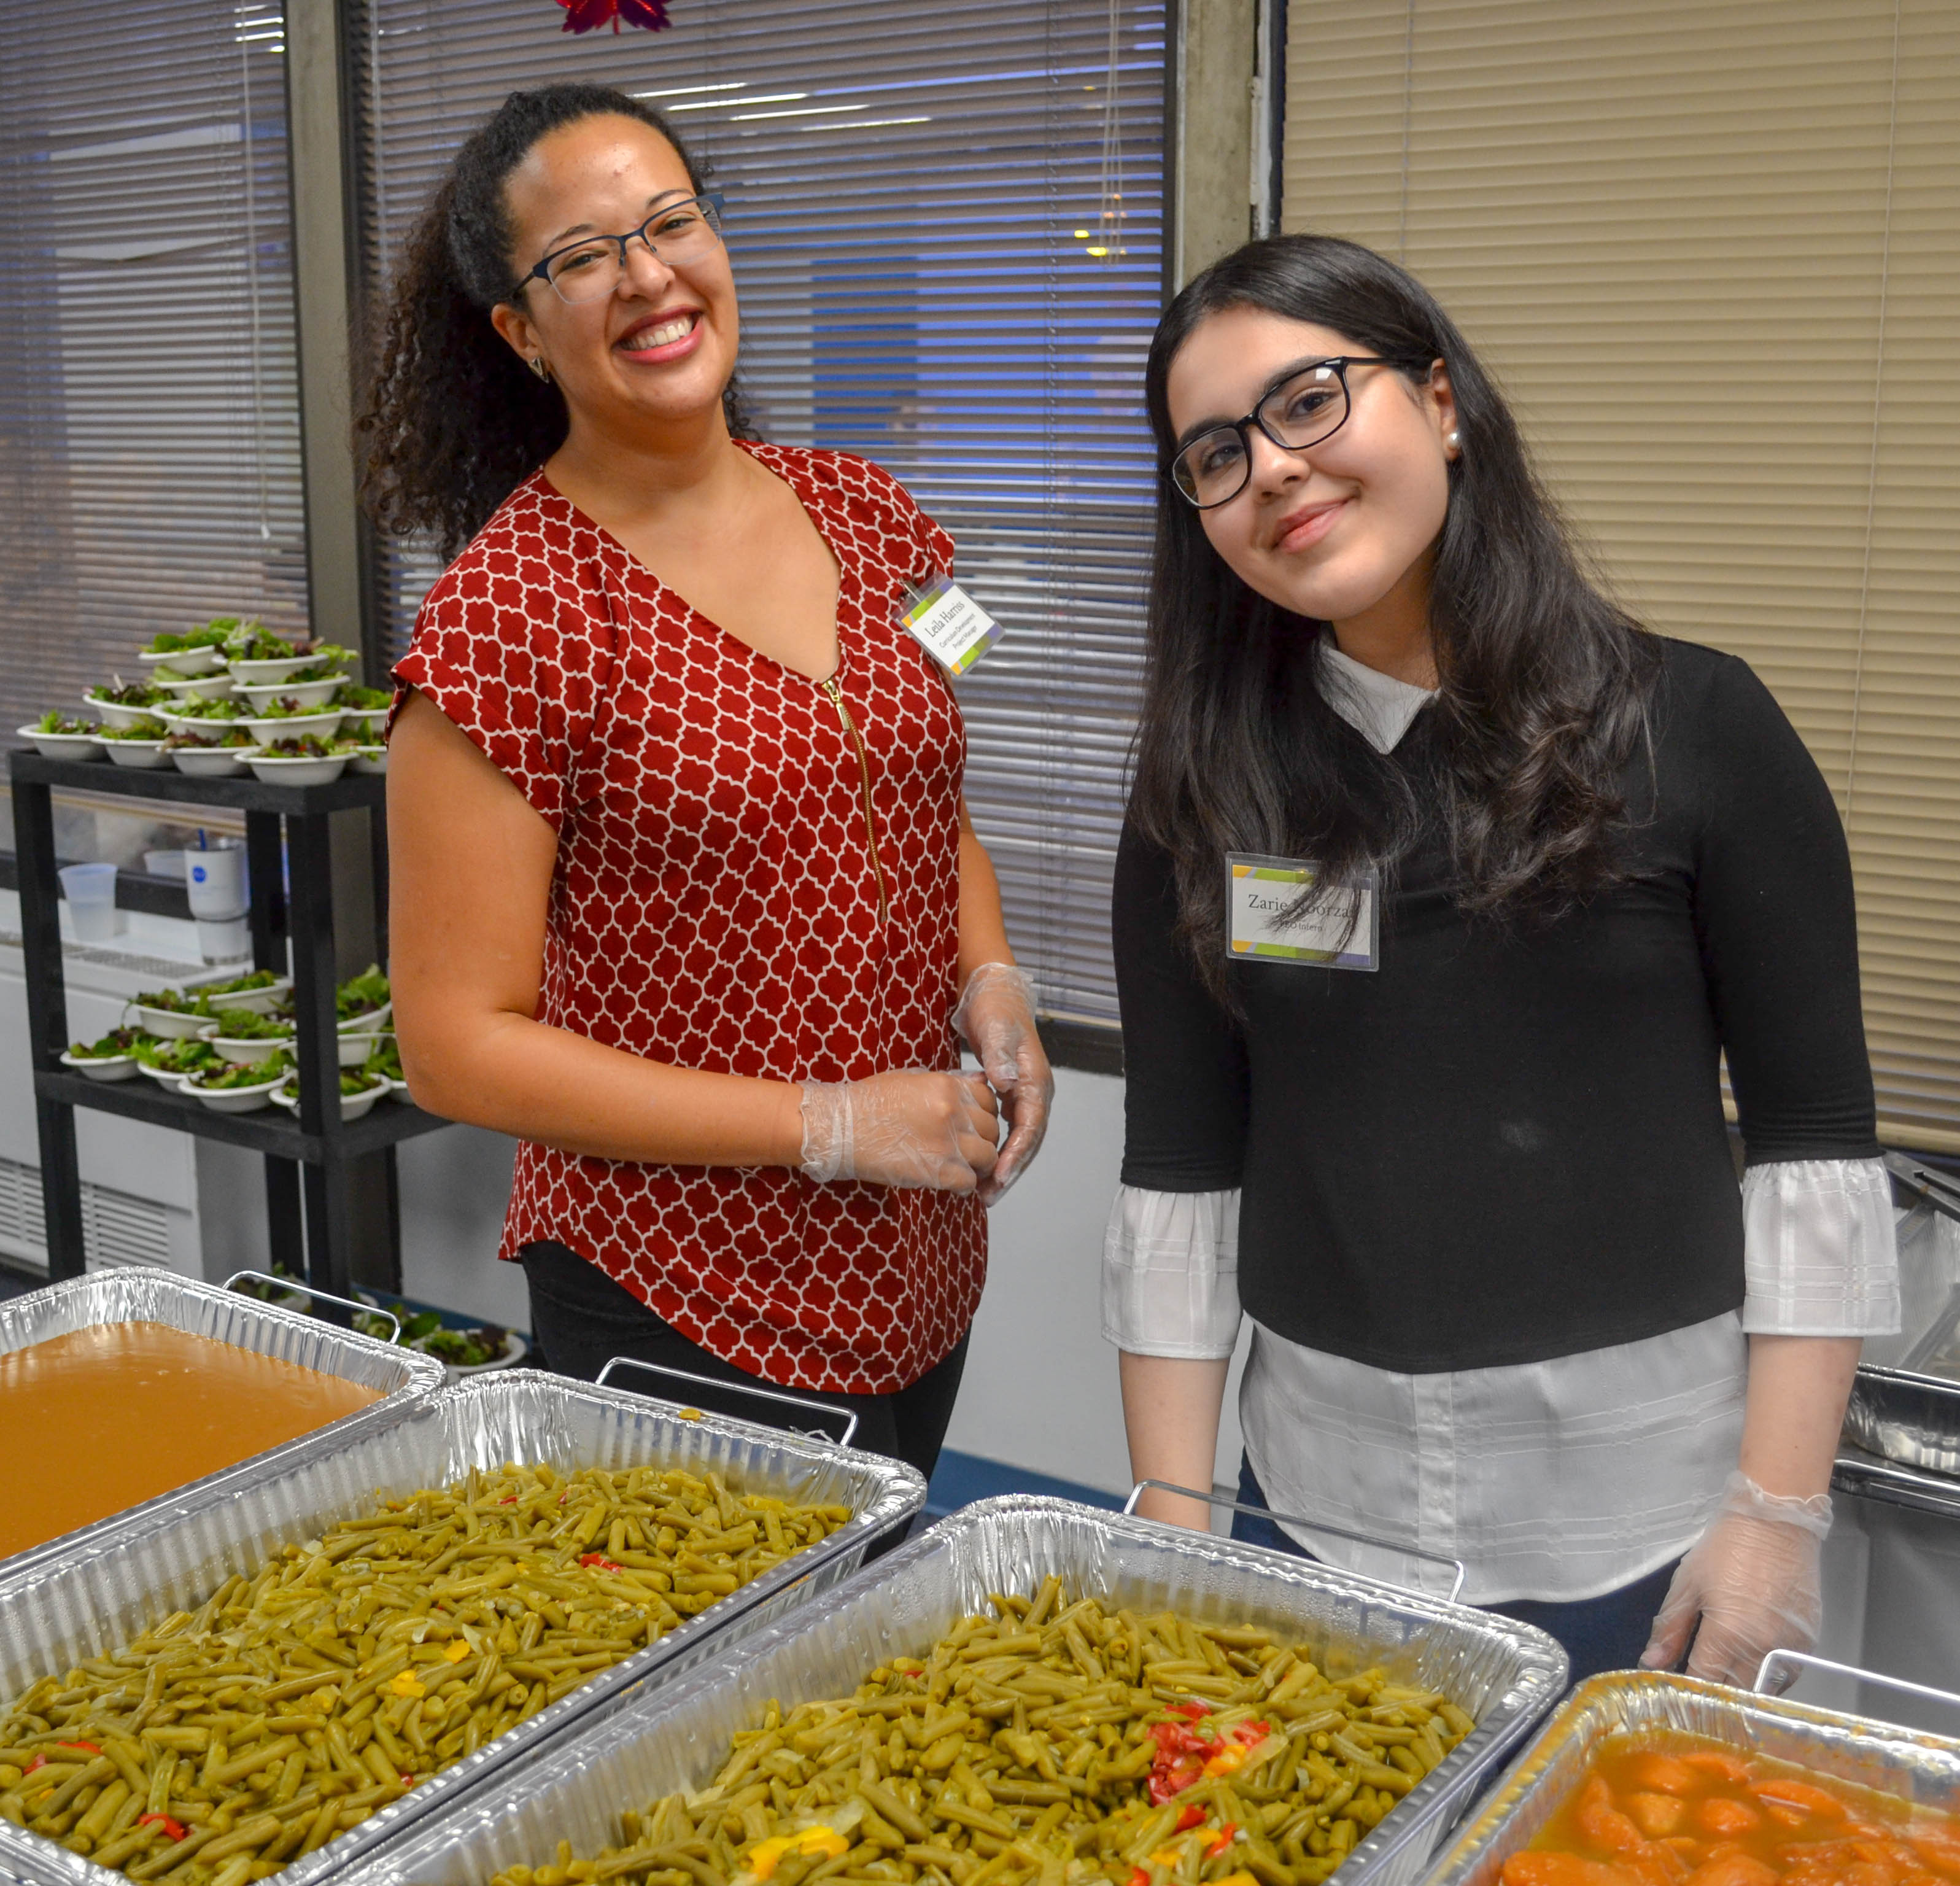 DLS staff members serve a Thanksgiving meal at our 2018 celebration